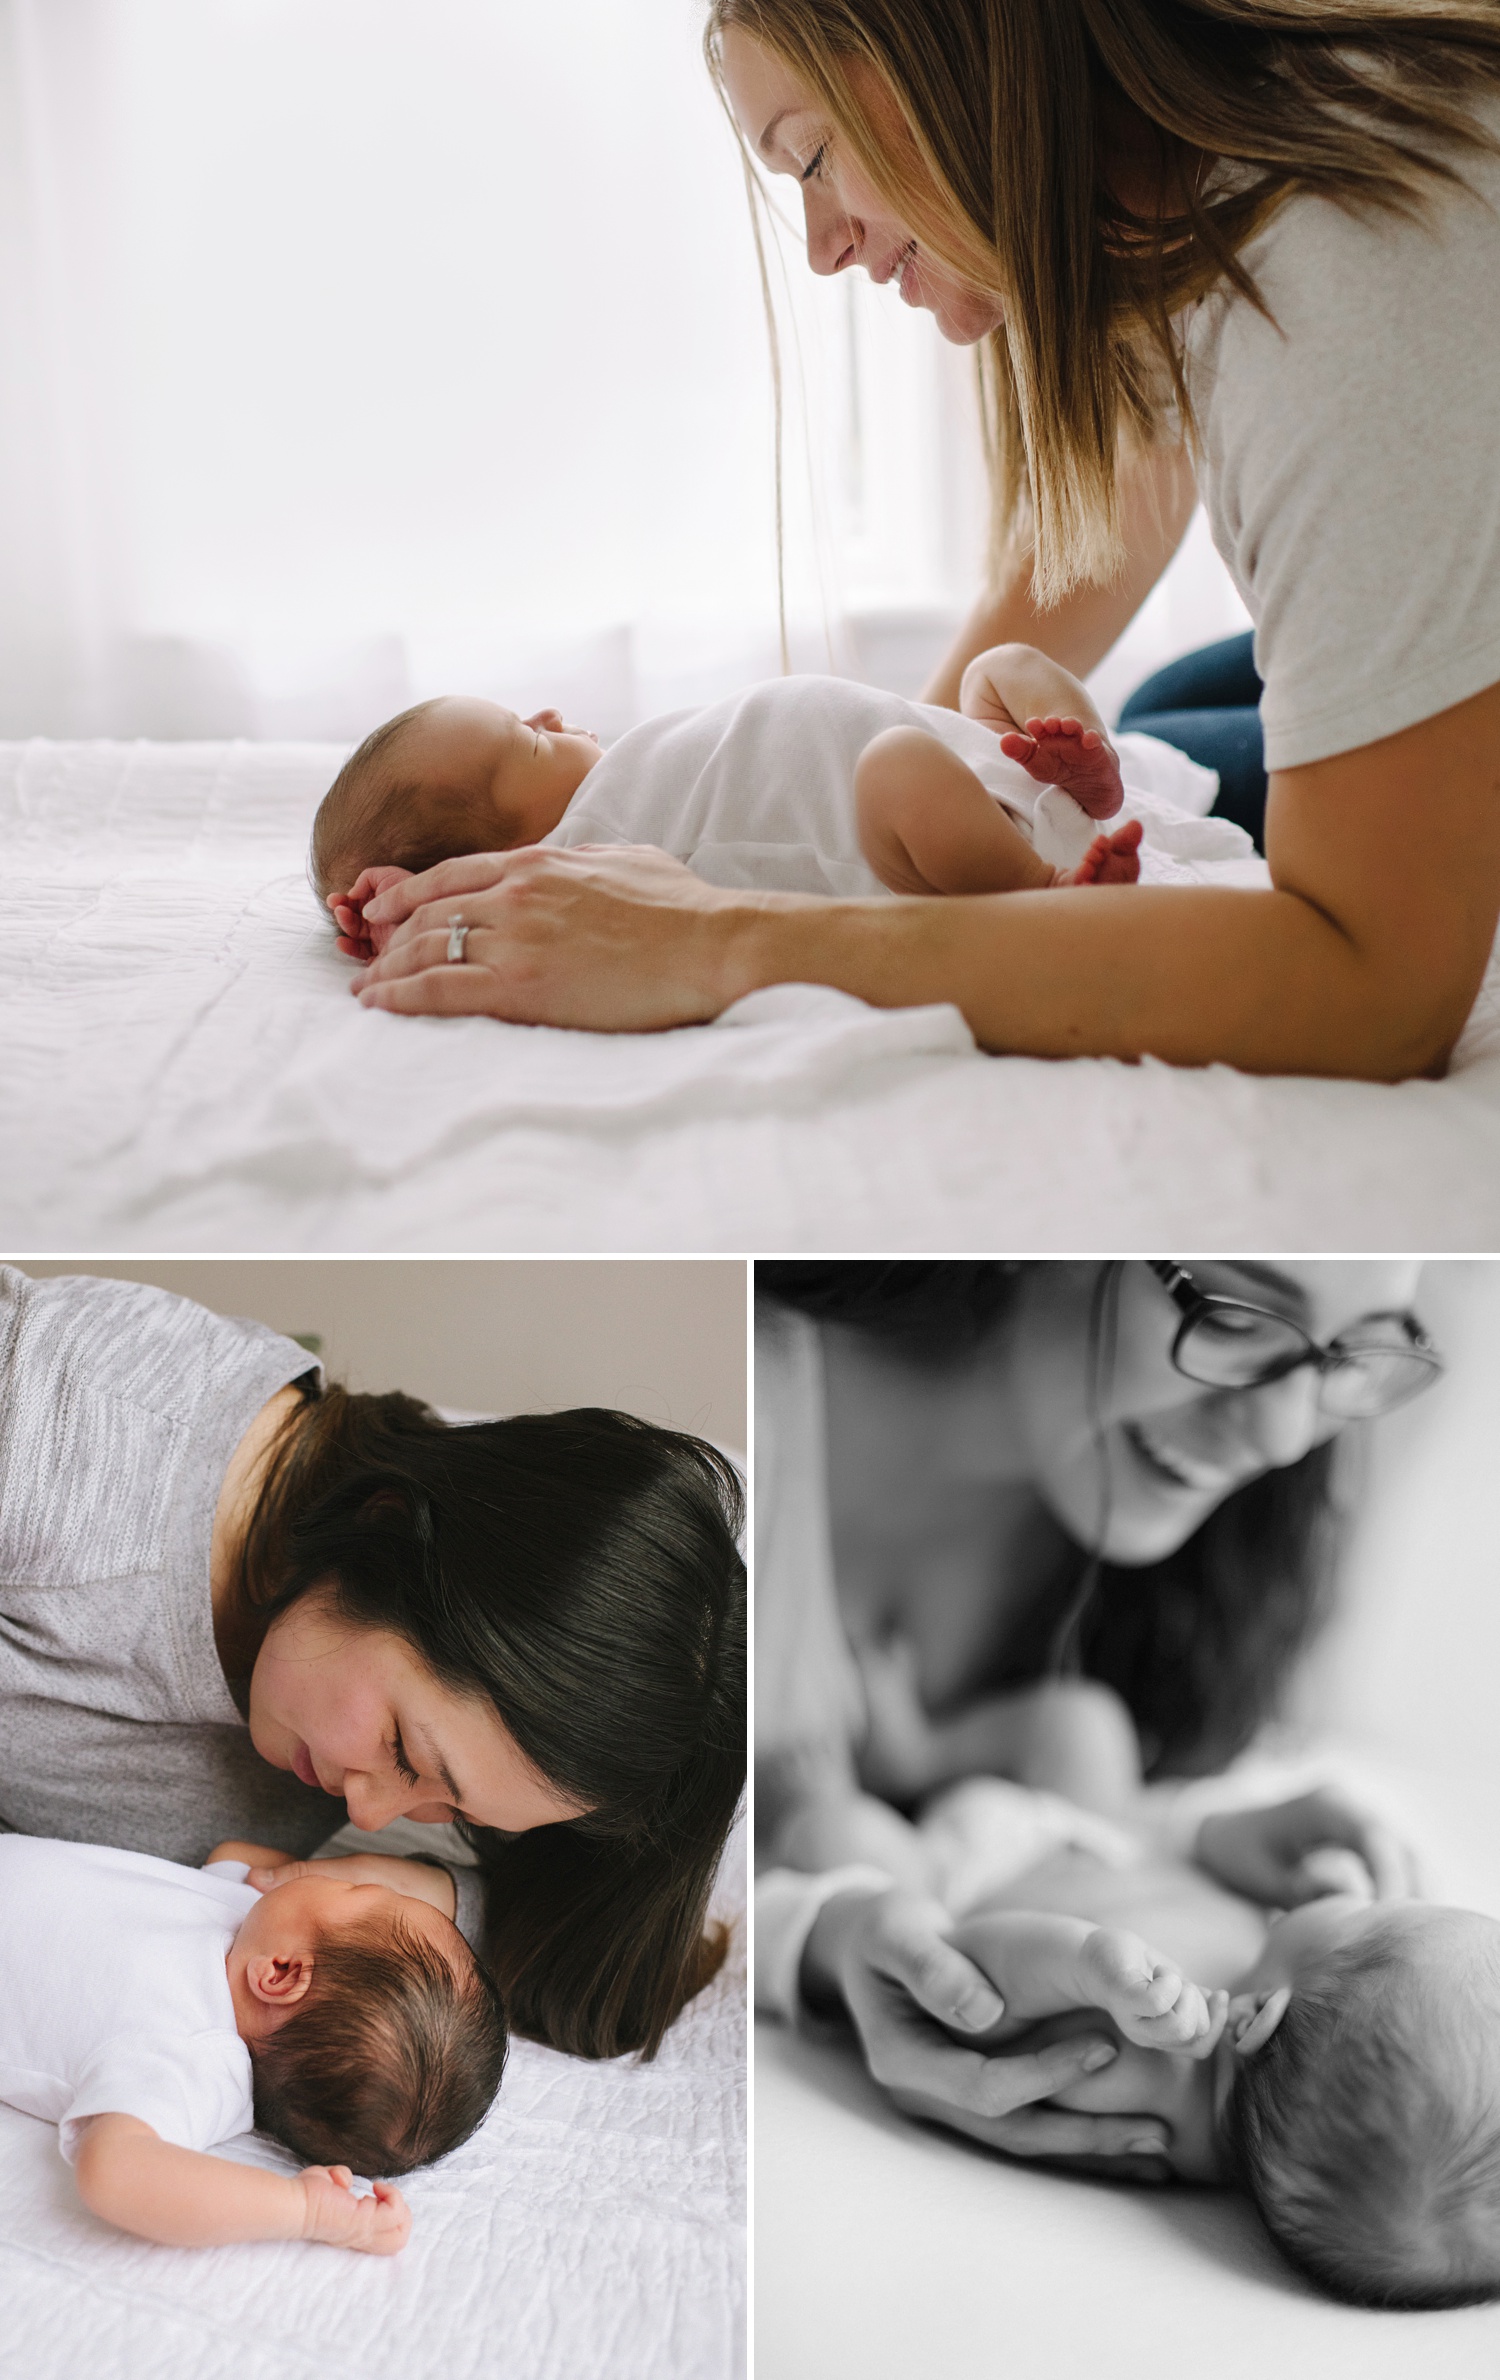 My Top 7 Posing Tips for Mom so You CAN Get Pinterest-Worthy Photos with Your Newborn